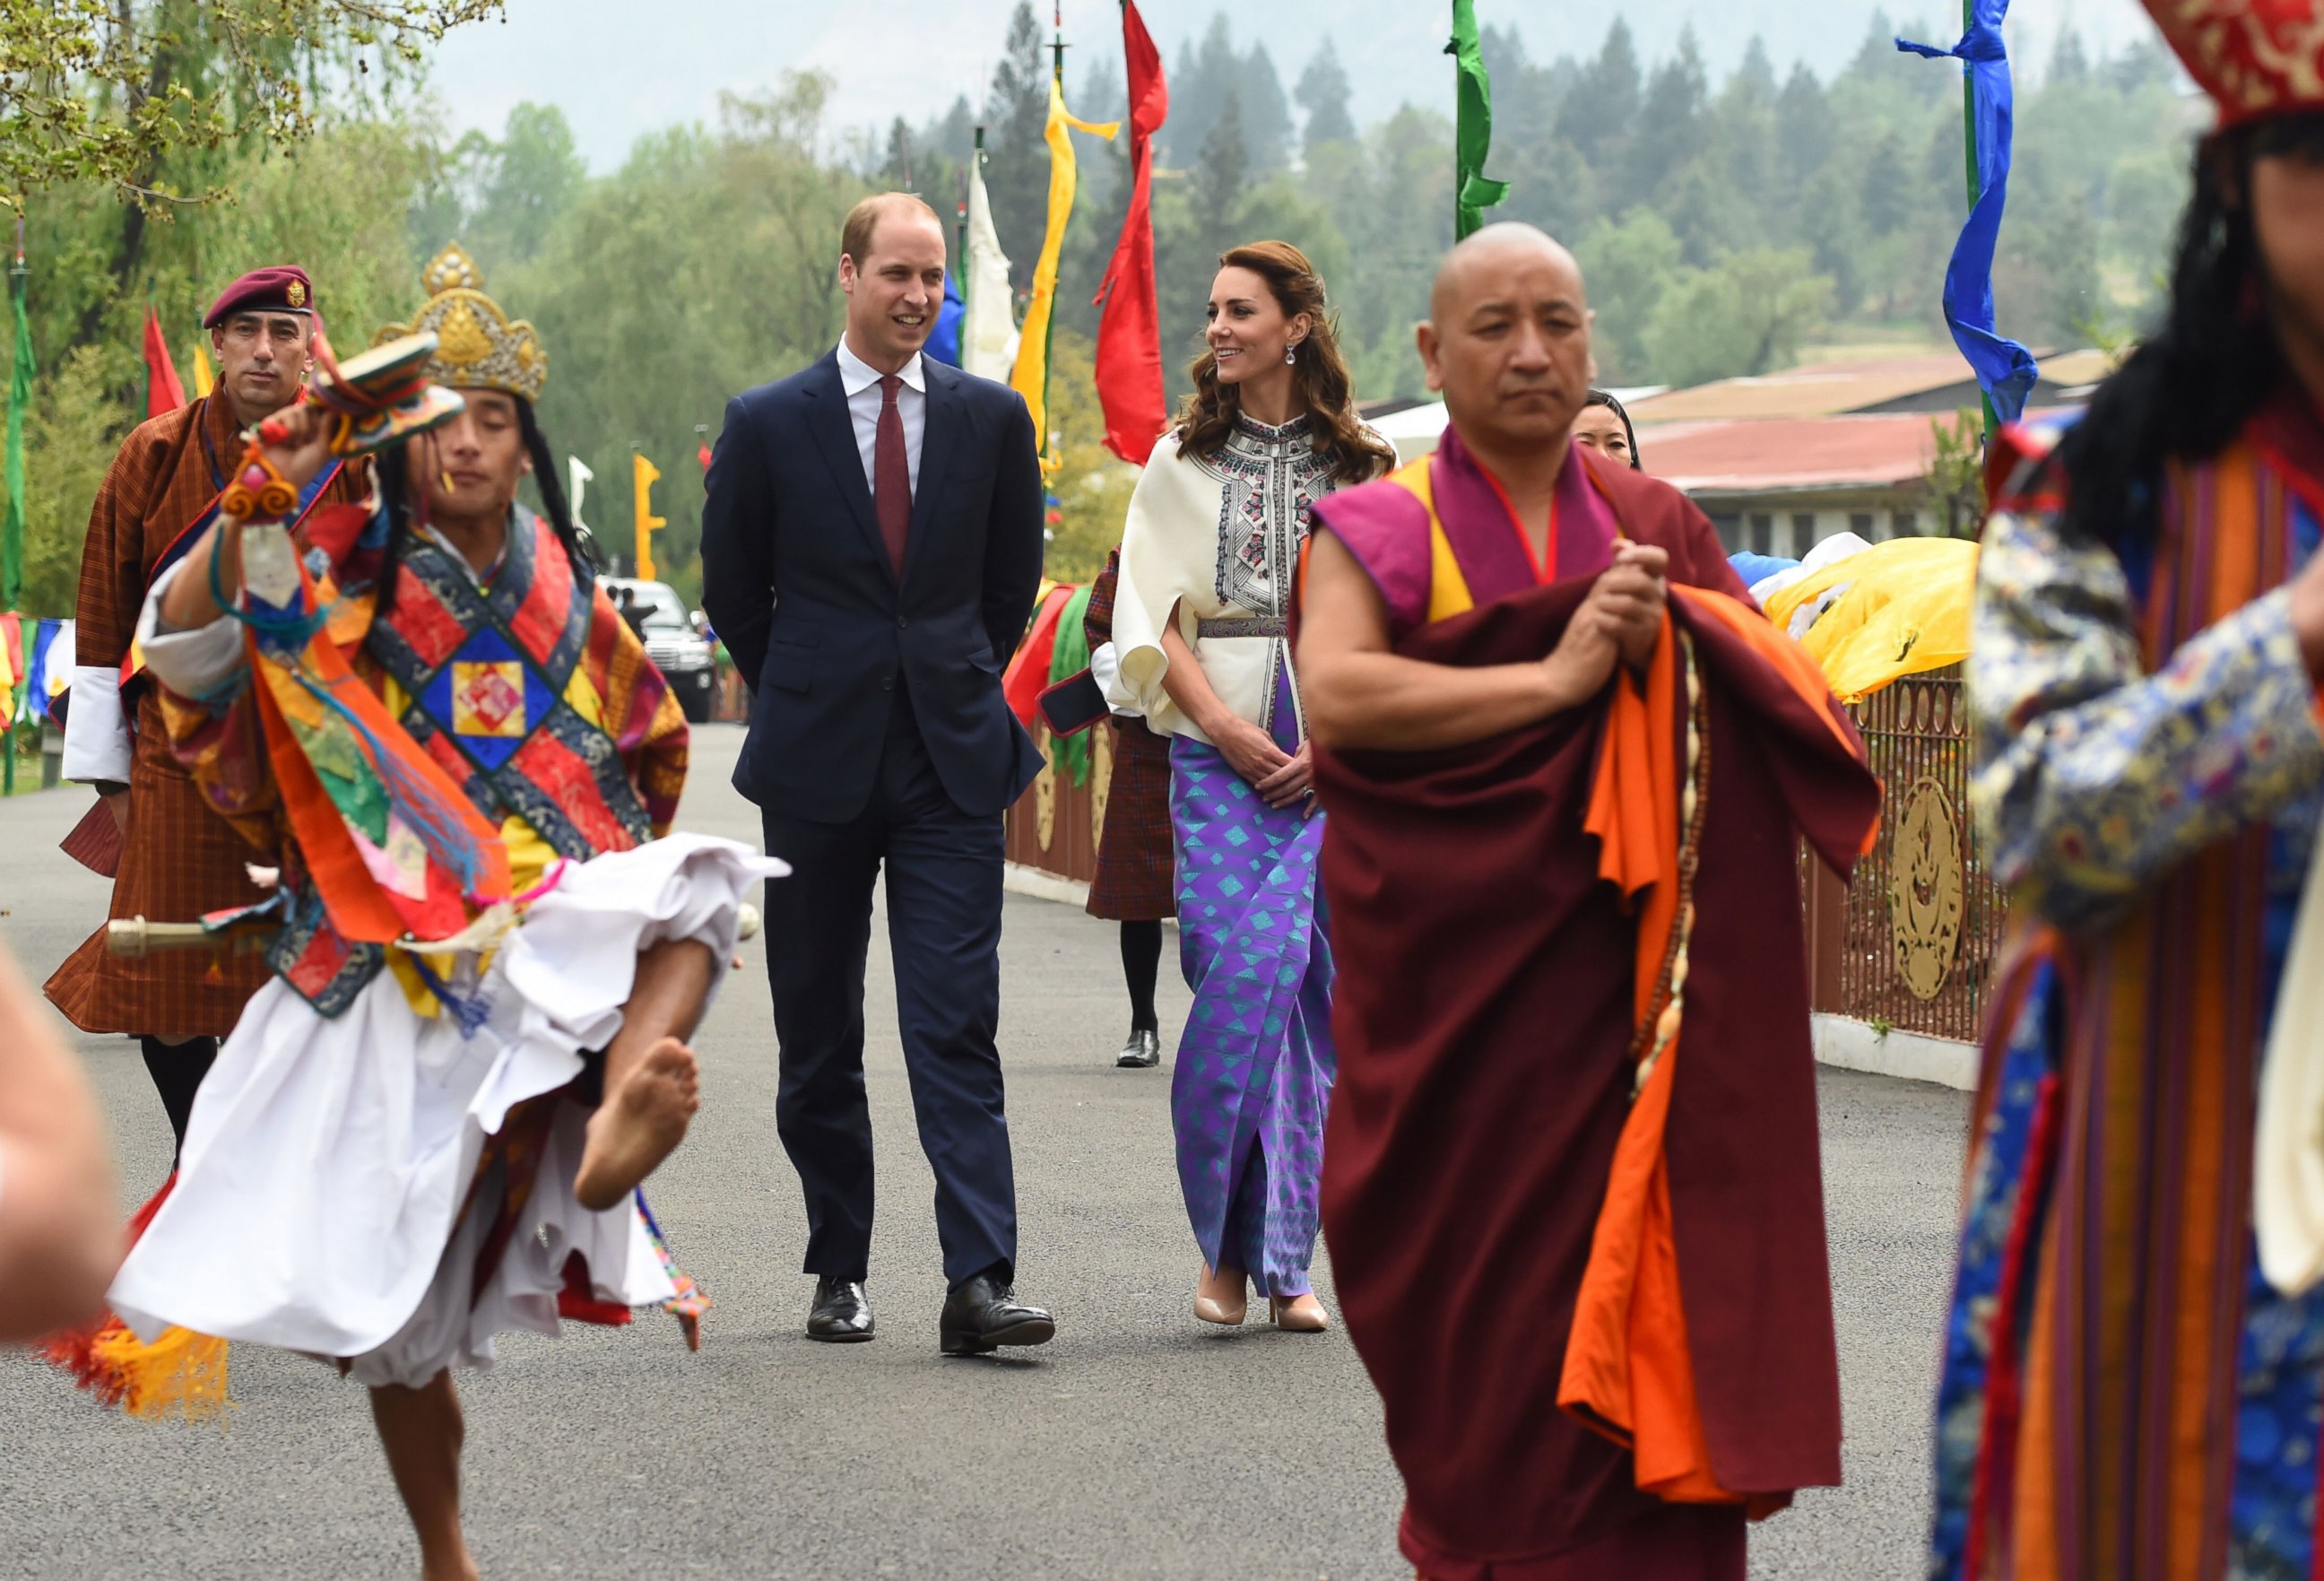 PHOTO:Prince William, Duke of Cambridge and his wife Catherine, Duchess of Cambridge follow a ceremonial procession after arriving at the Tashicho Dzong to meet the King and Queen of Bhutan in Thimphu, April 14, 2016.   